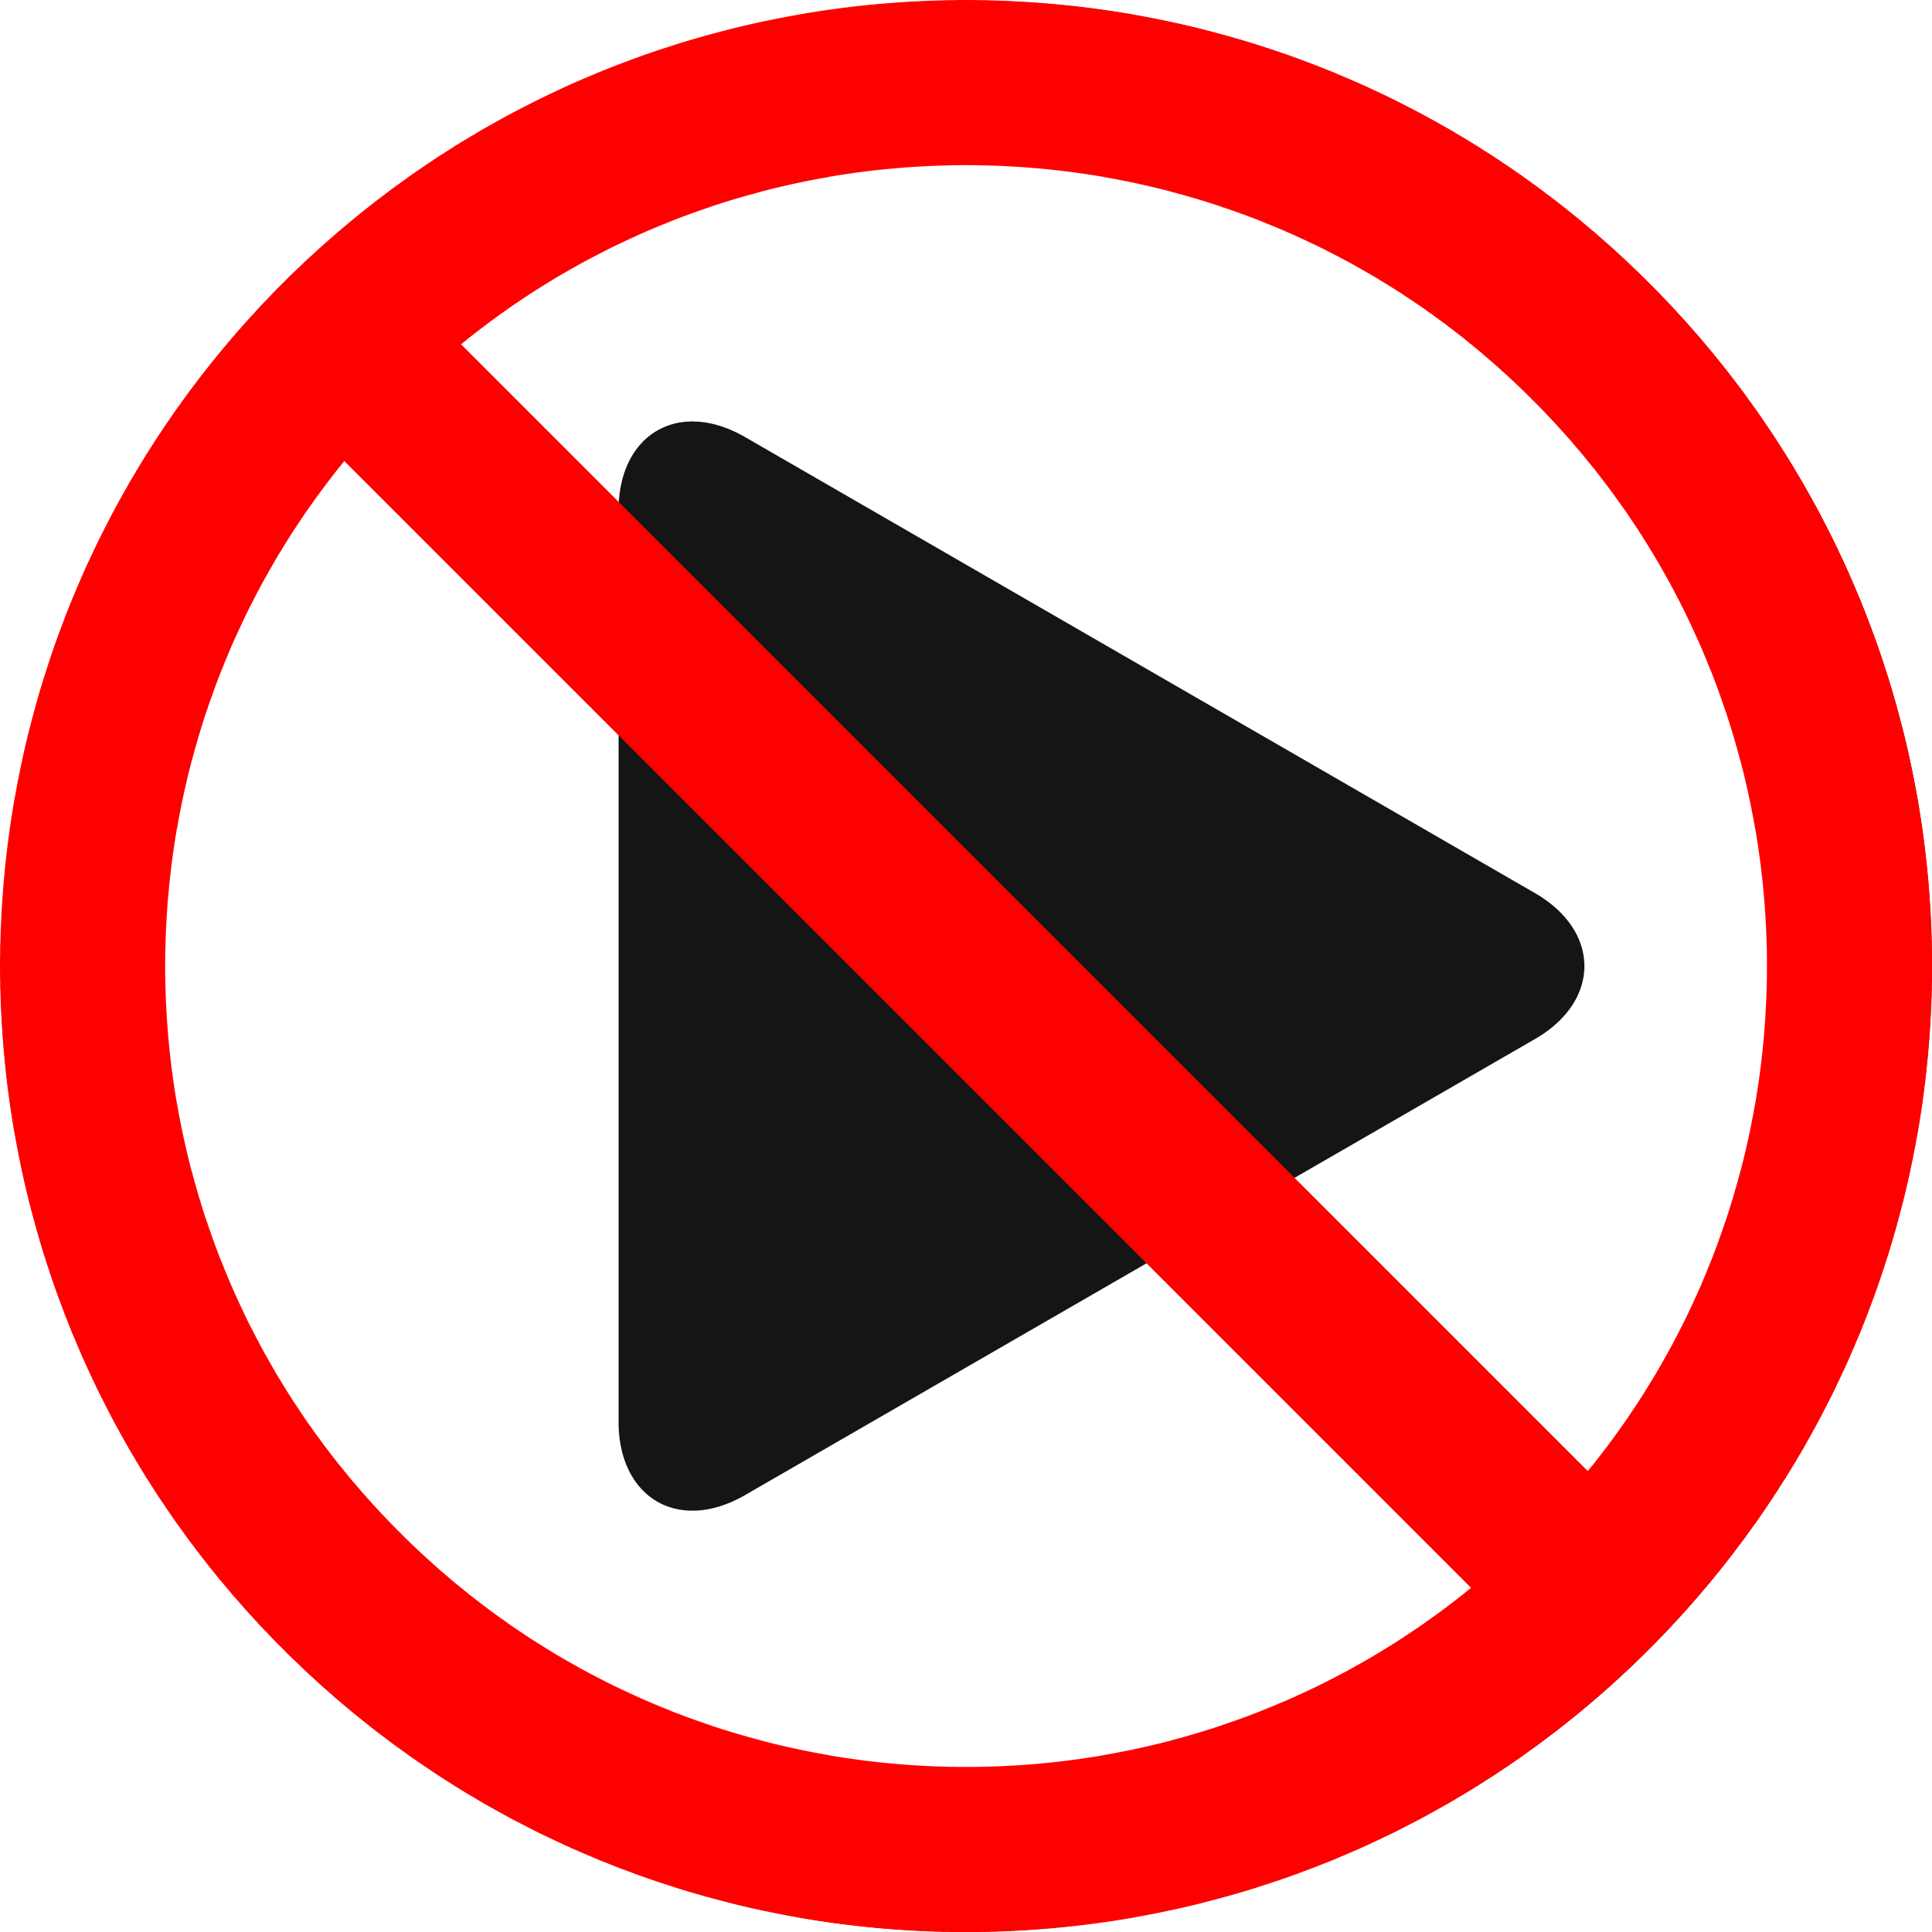 do not play symbol - Easy On Hold | Blog